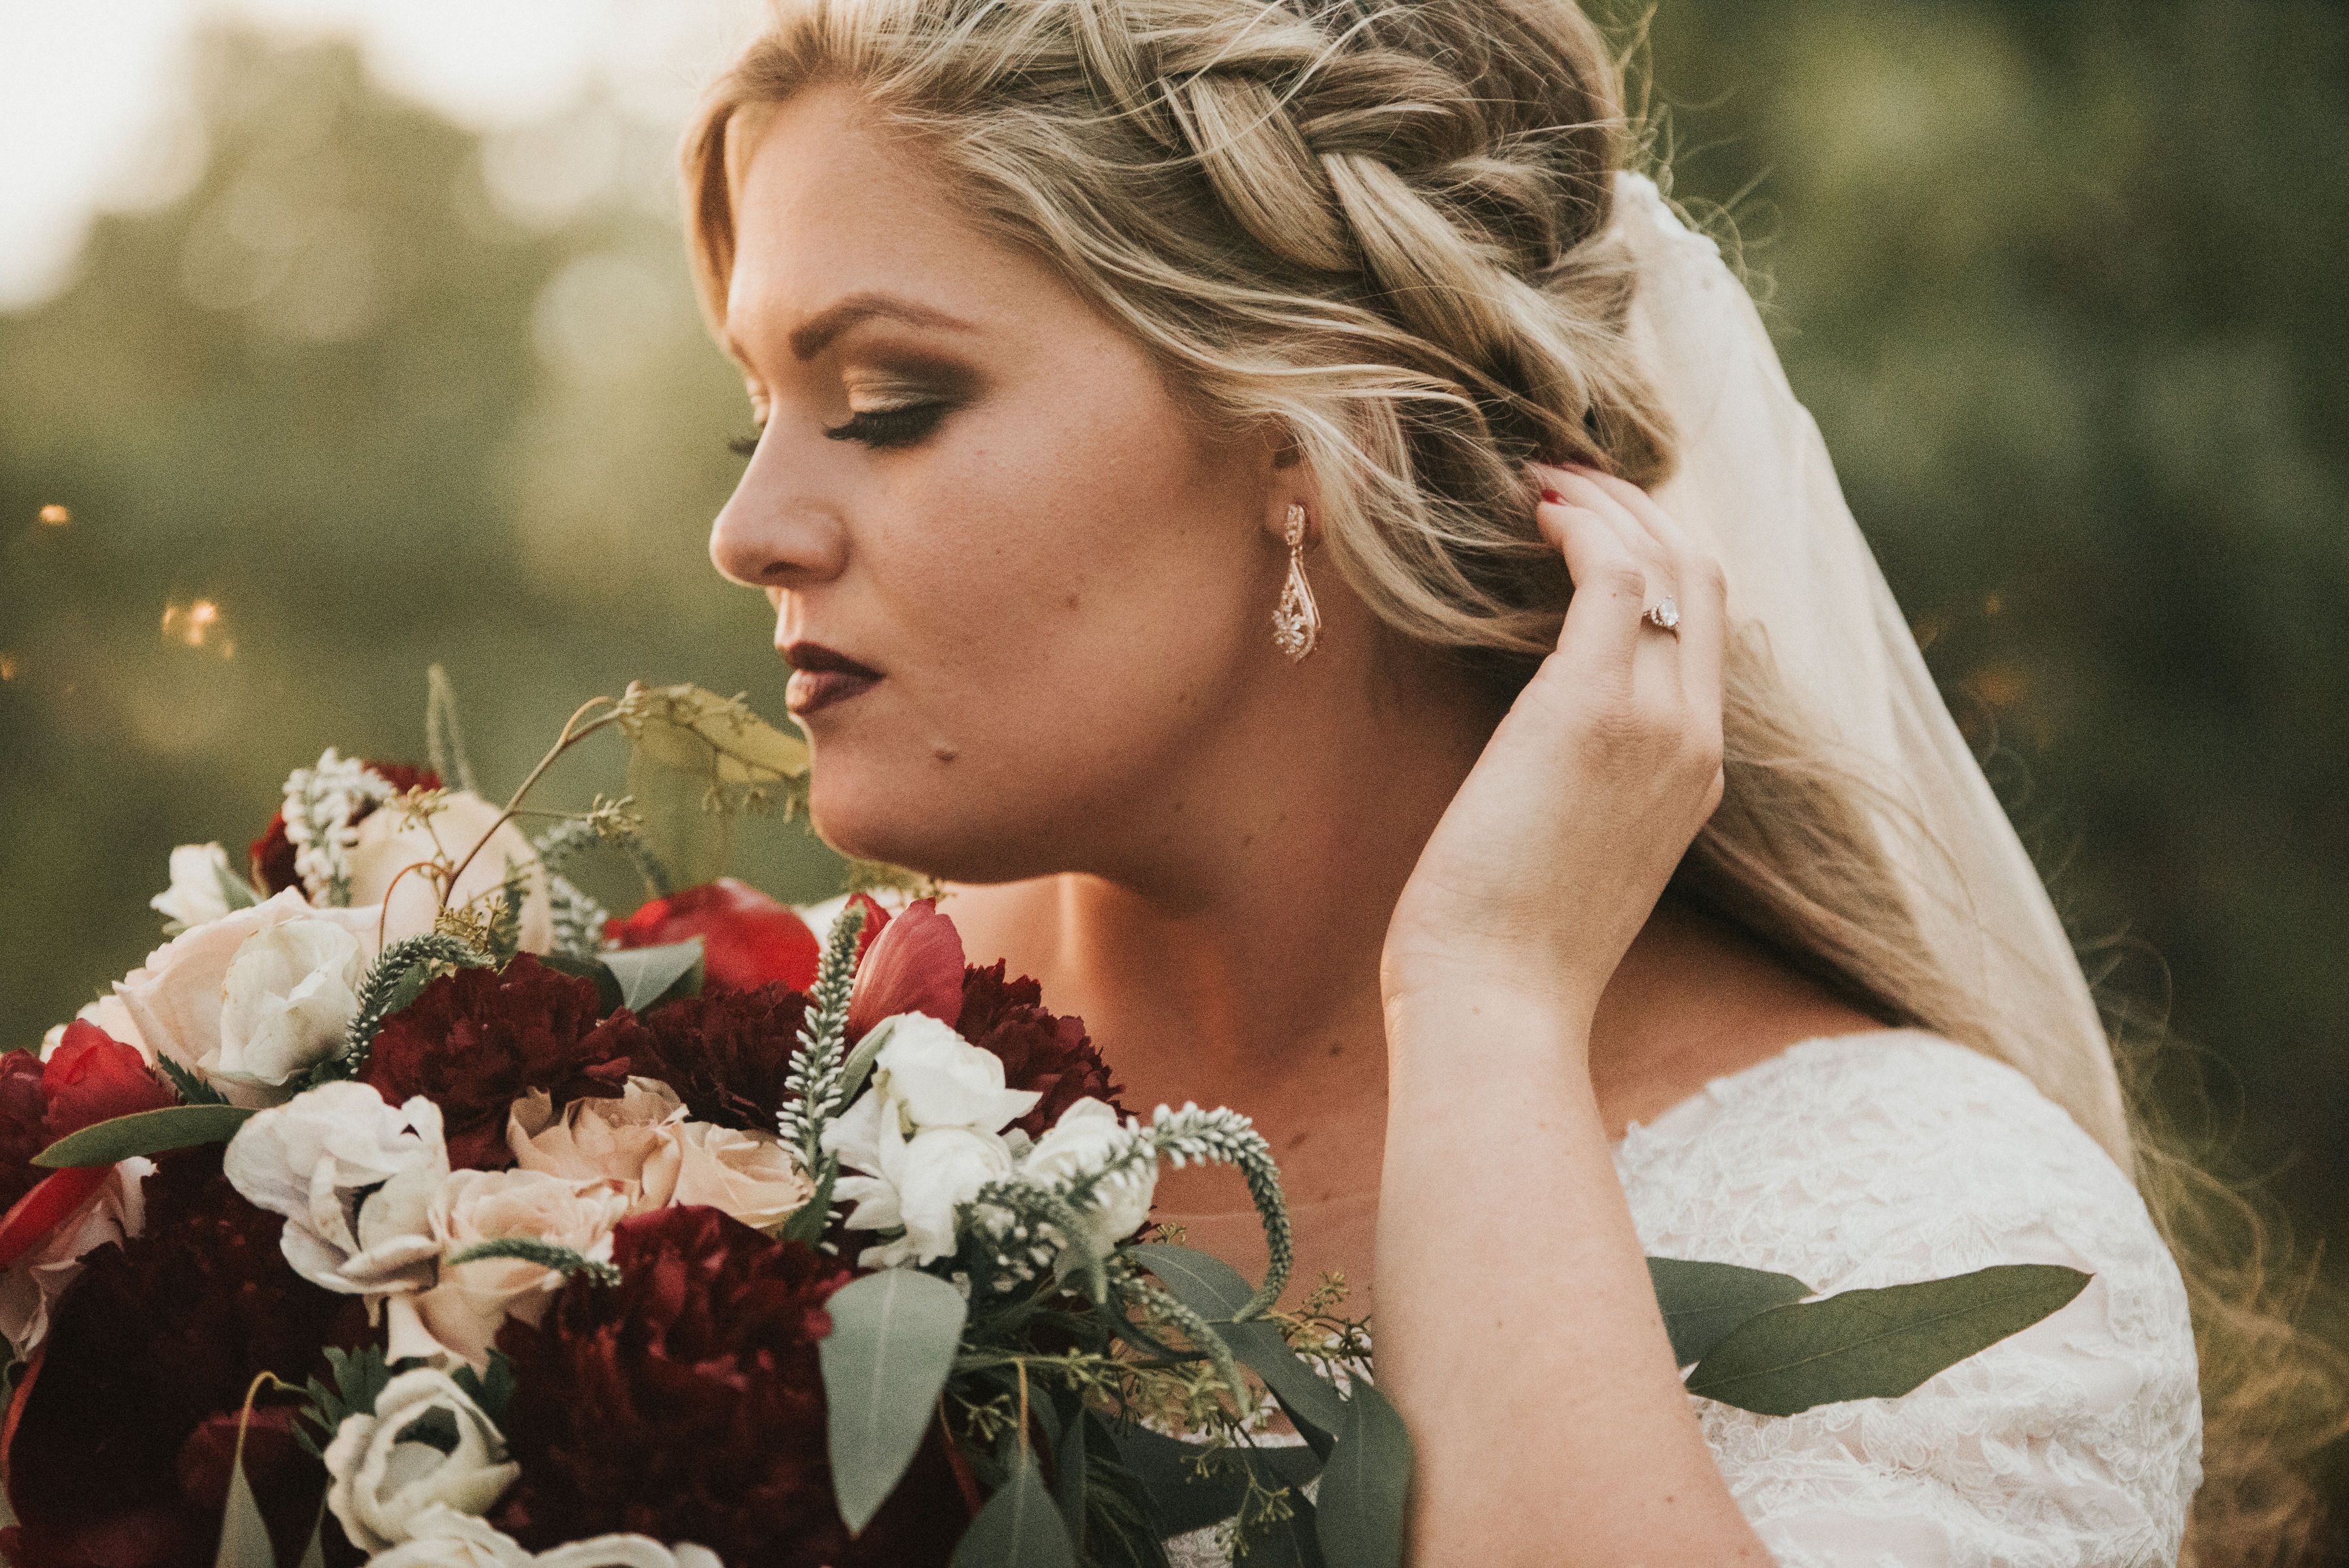 Lauren_Steven_This_Is_The_Place_Heritage_Park_Salt_Lake_City_Utah_Bride_In_Her_Veil_With_The_Bouquet.jpeg